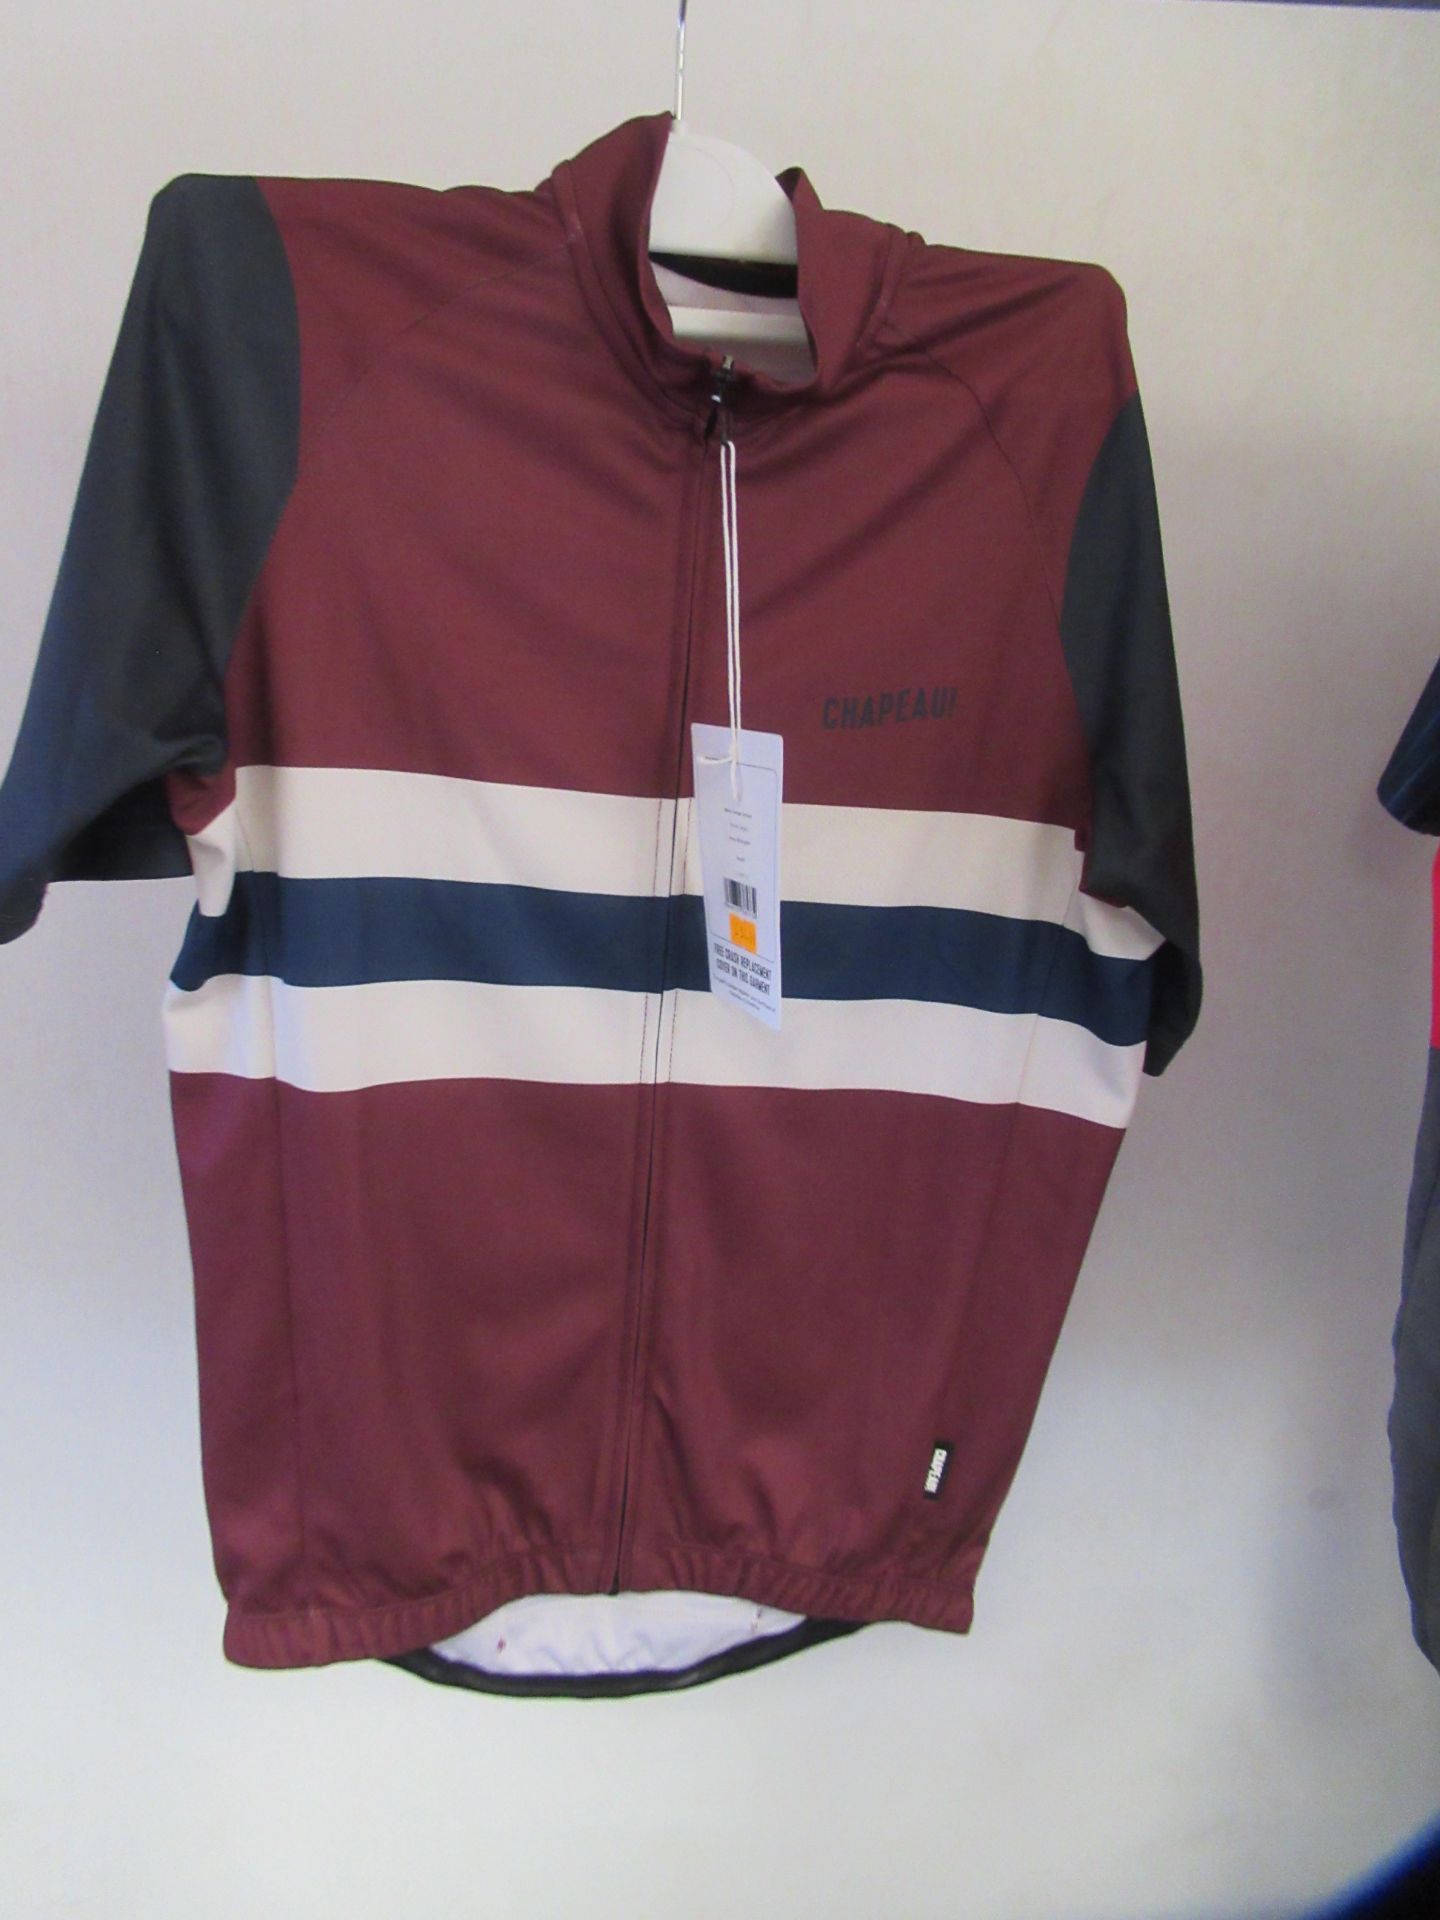 5x S Male Cycling Clothes - Image 6 of 6